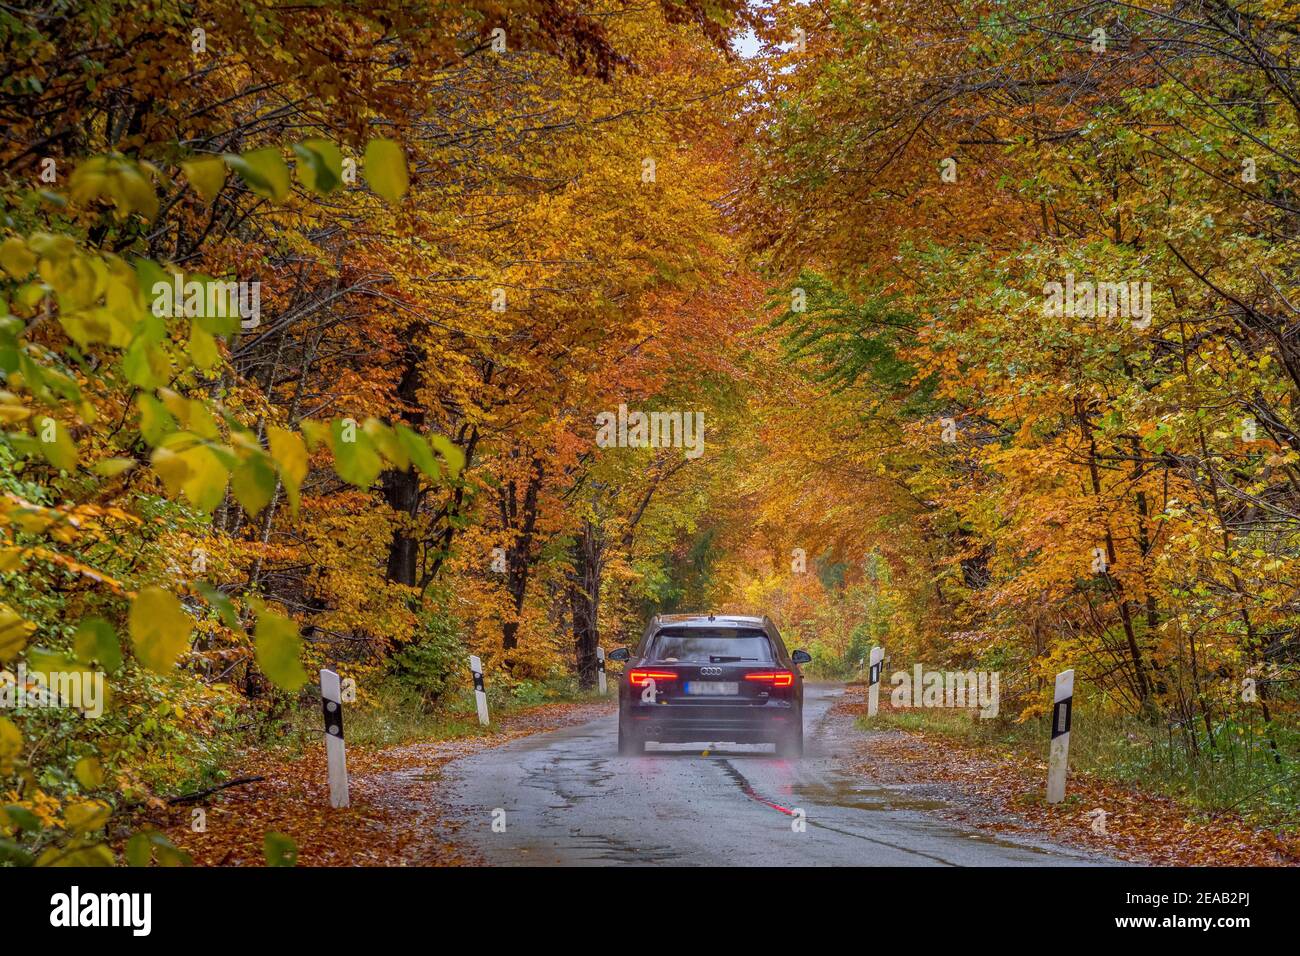 Traffic on a country road in the rain through a forest in autumn, Upper Bavaria, Bavaria, Germany, Europe Stock Photo